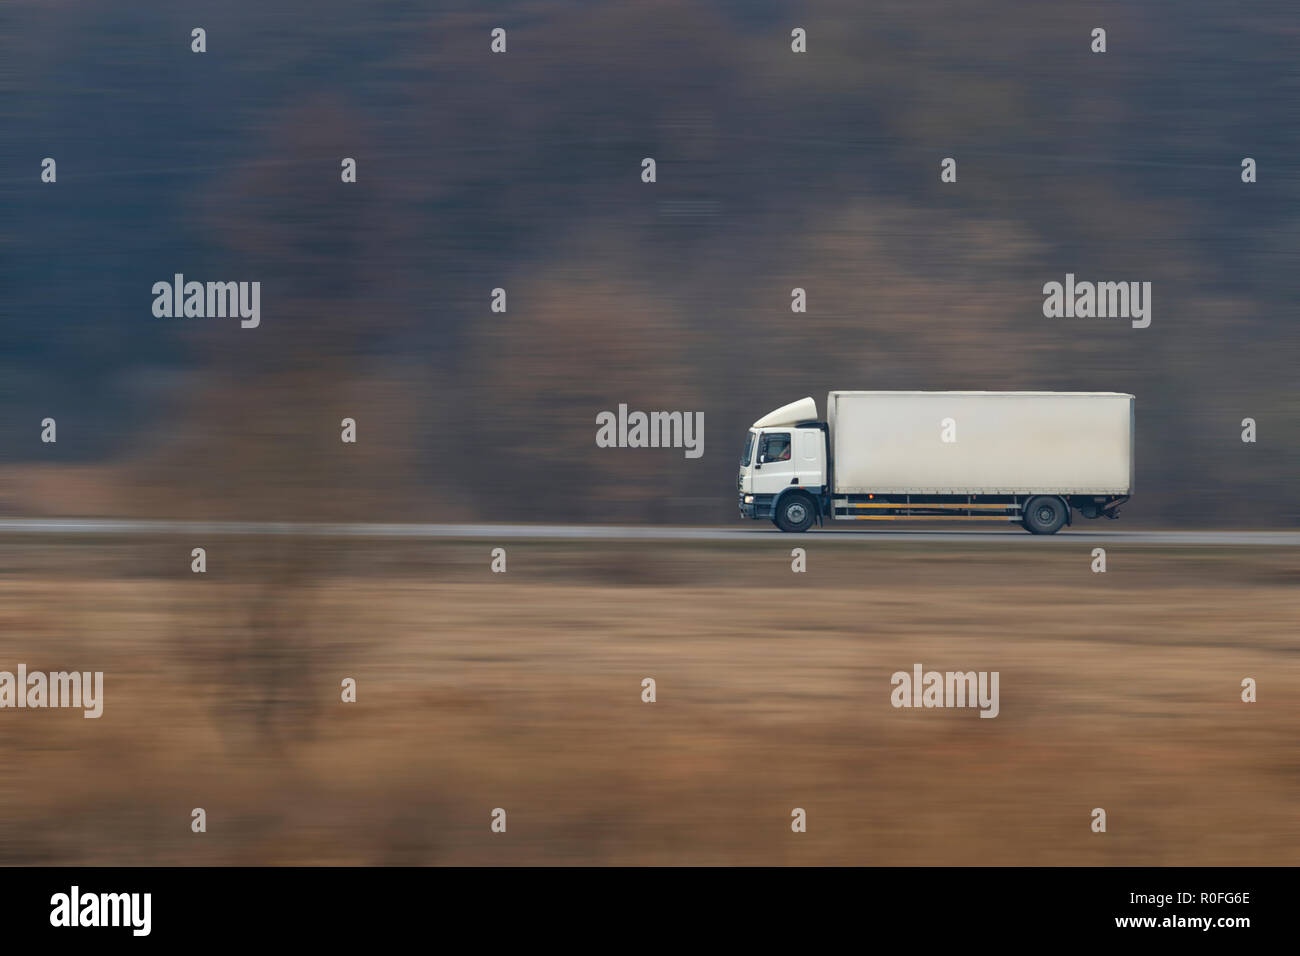 Truck going fast on a suburban road Stock Photo